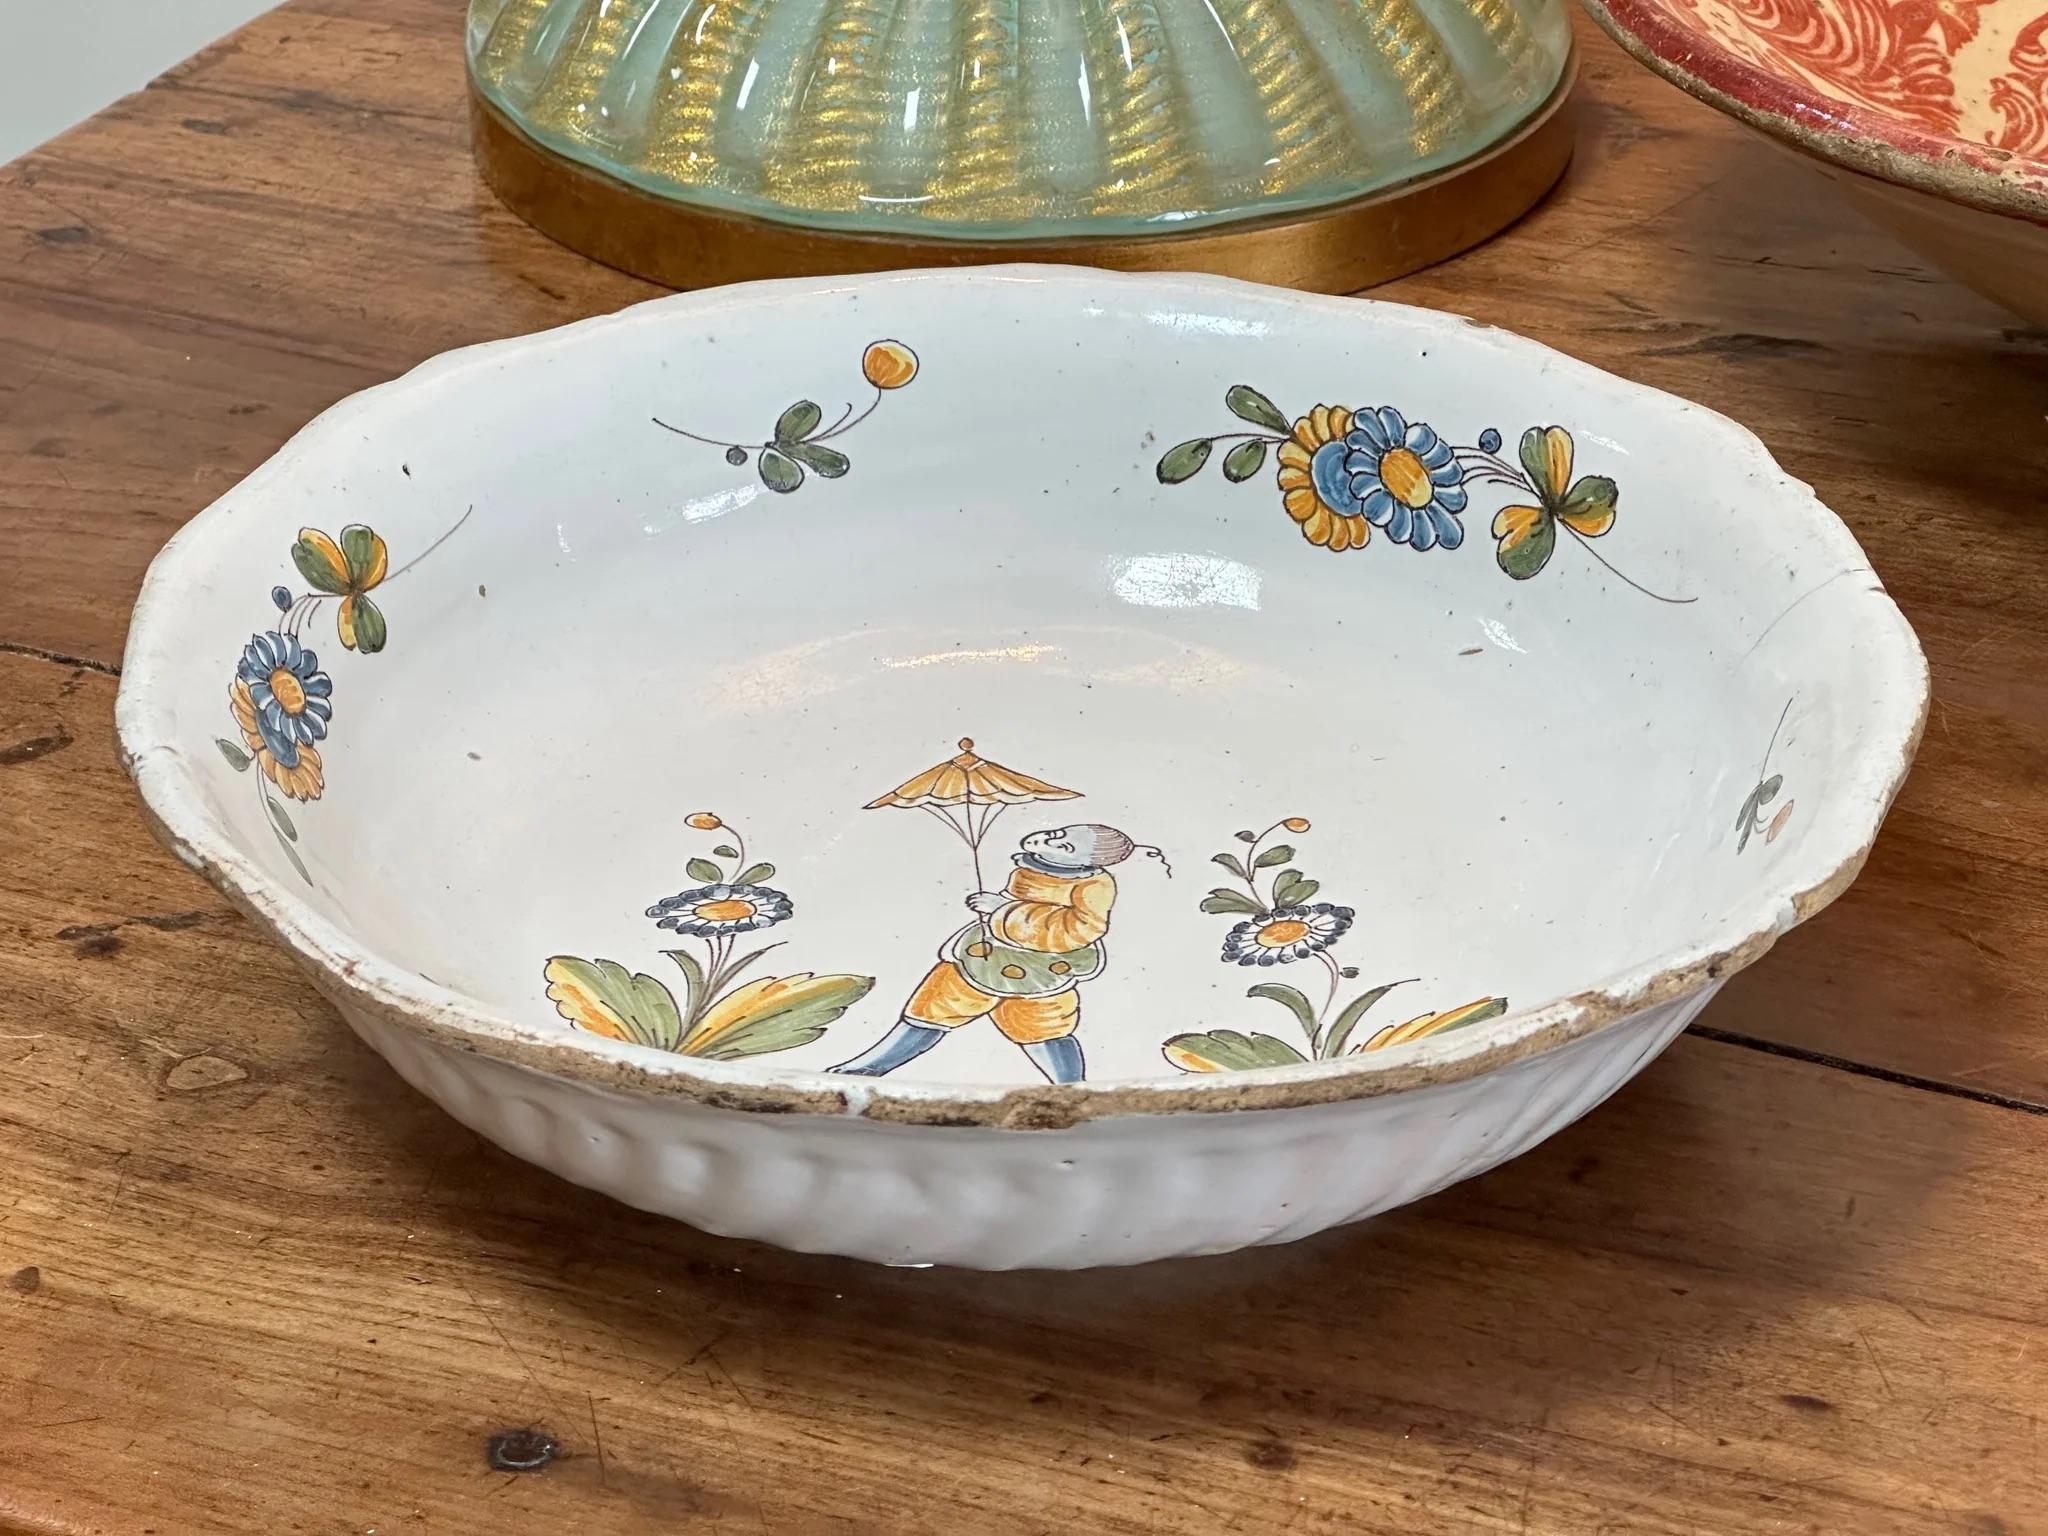 18th century Continental, most likely French,  Faience Earthenware Serving Bowl with fluted sides; hand painted vignette of a chinoiserie character with an umbrella flanked by images of flowers. Scalloped rim. Hanging holes on the foot.